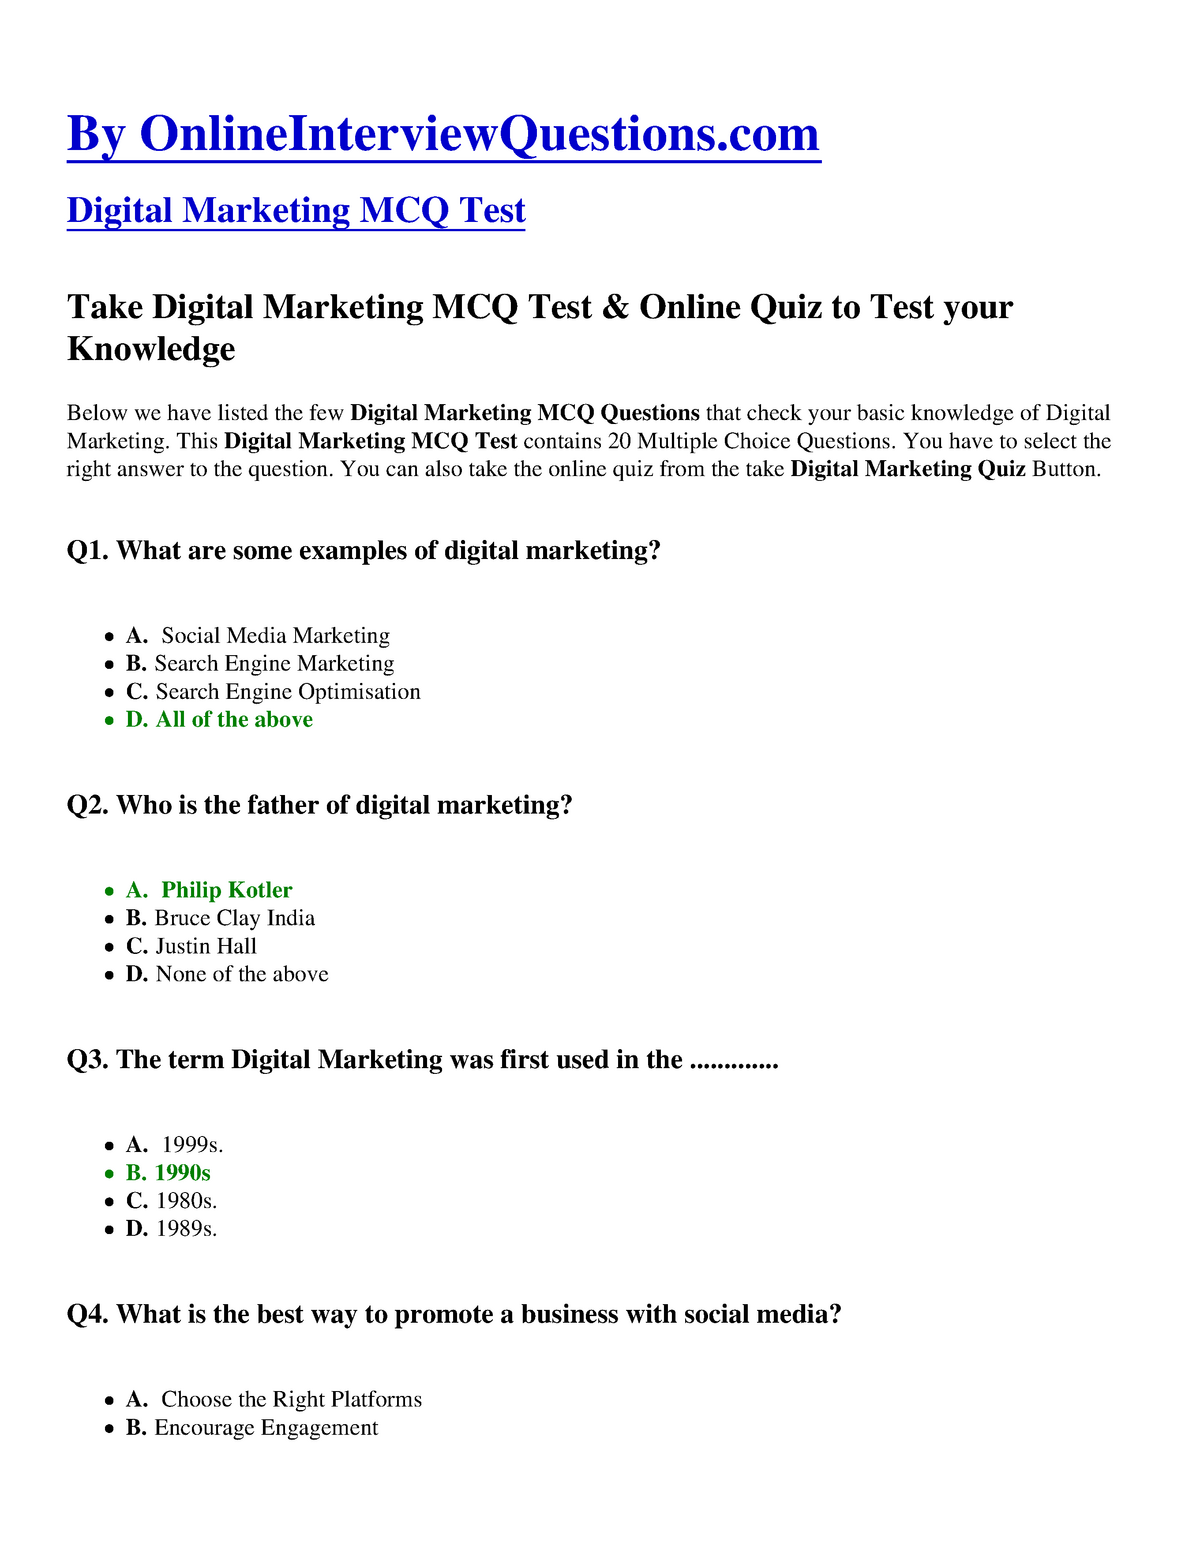 marketing research multiple choice questions and answers